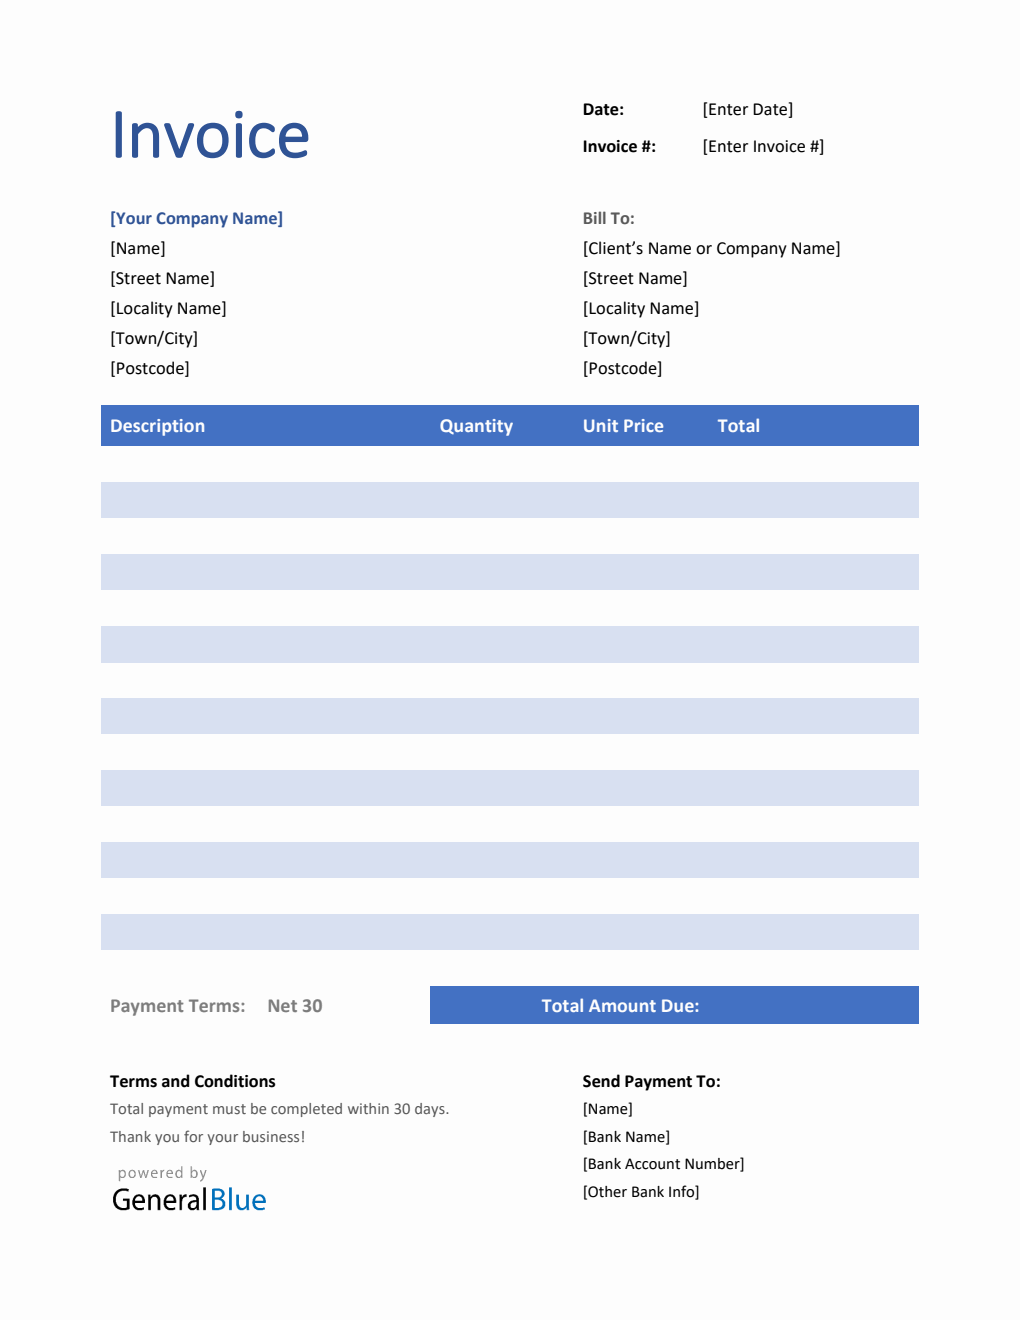 Invoice Template for U.K. in Word (Striped)